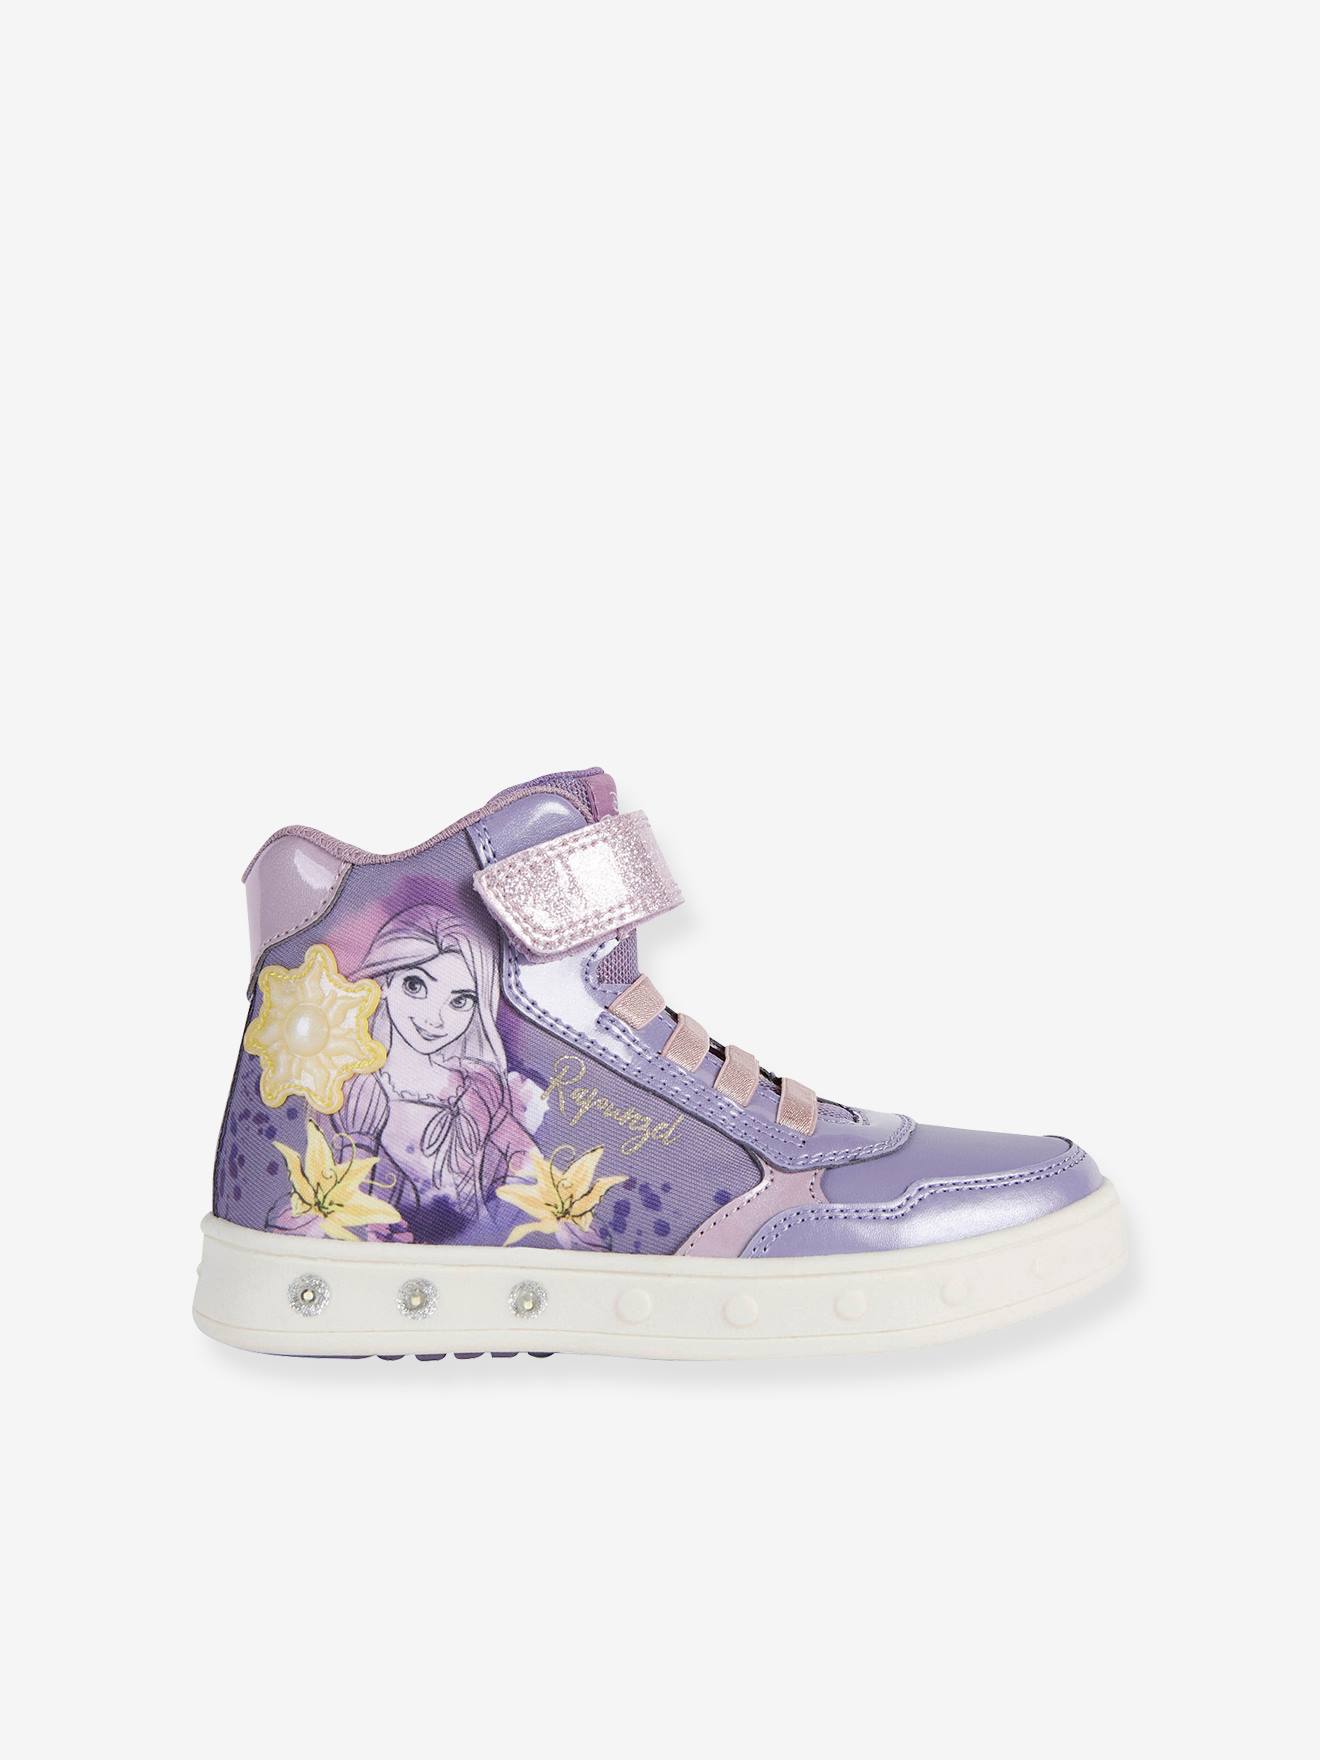 High-Top for Girls, Skylin by lilac, Shoes